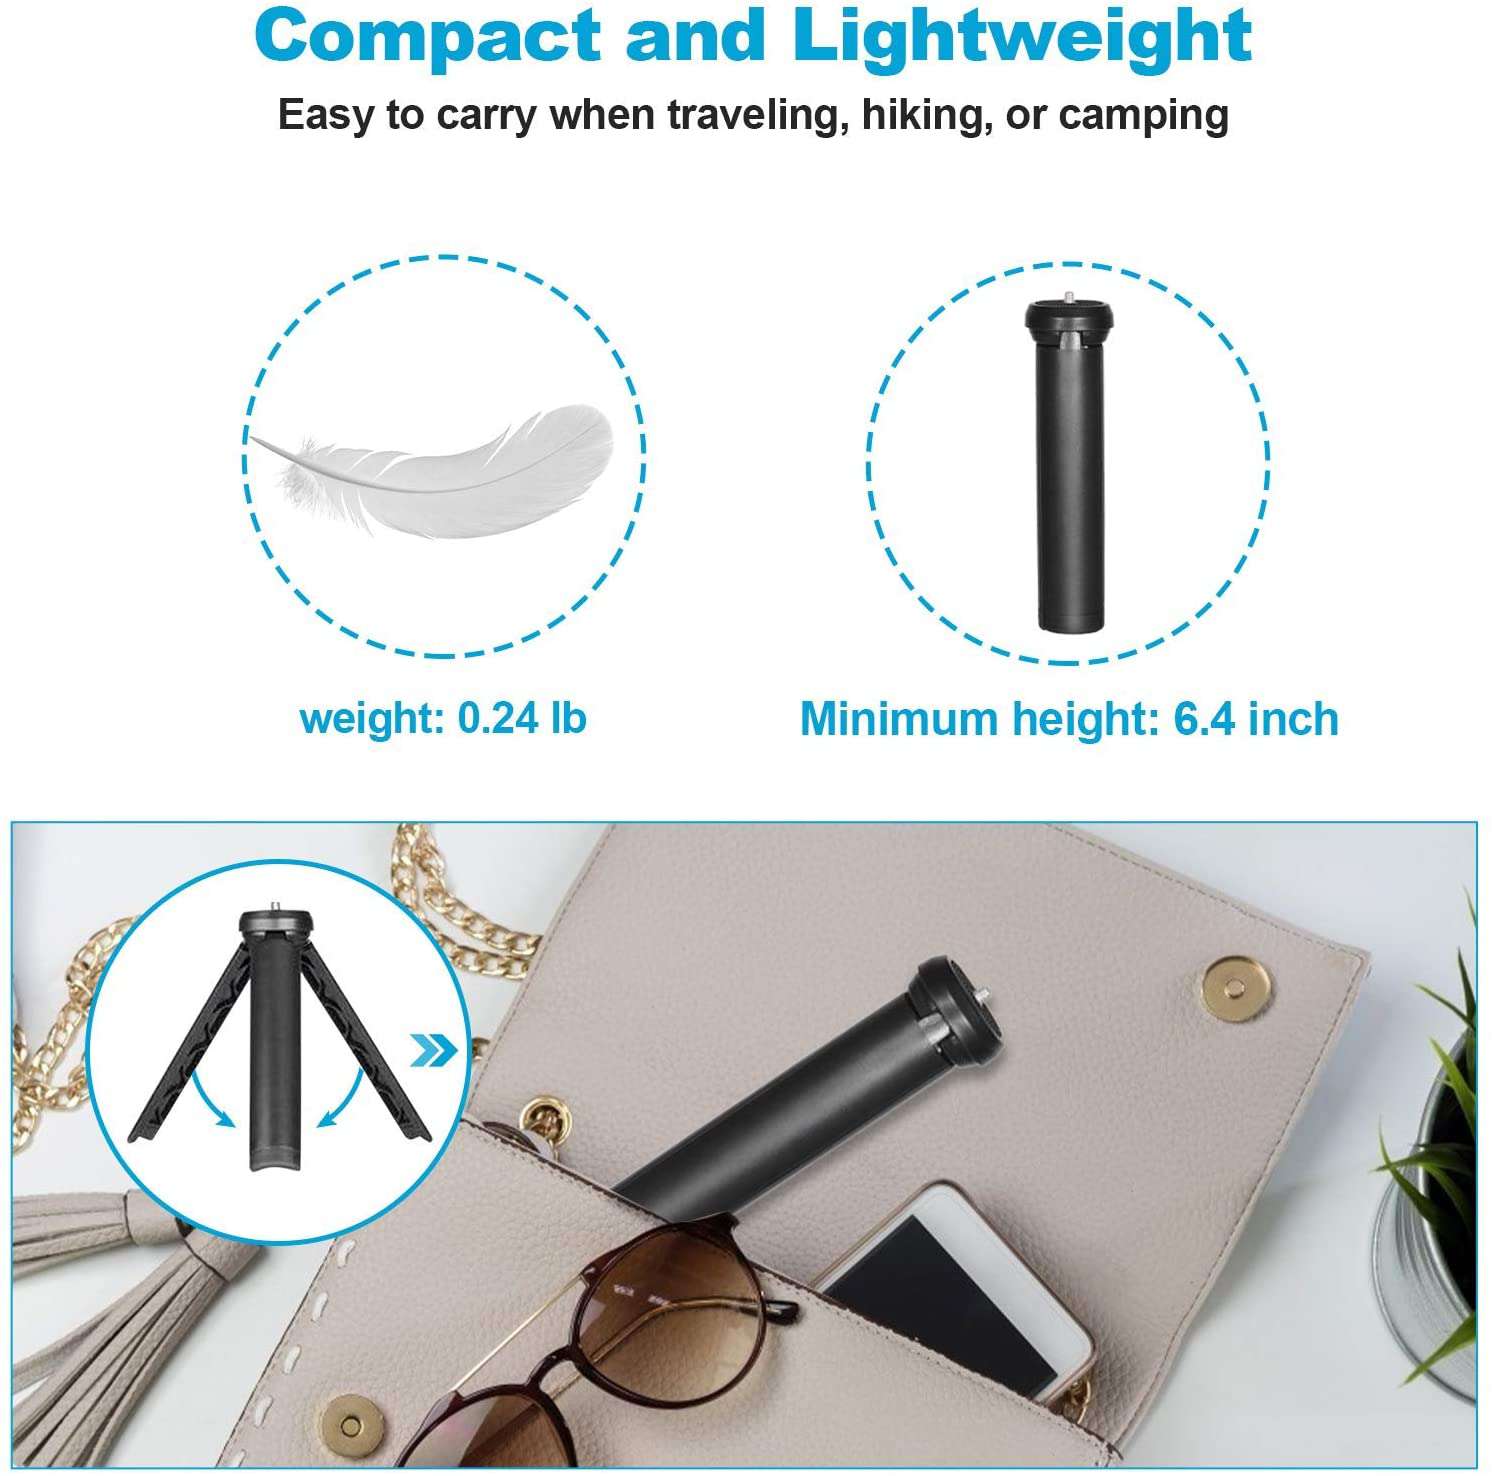 Compact design. Minimum length of 6.4''. Weighs only 0.24lb. Portable for on-the-go use.